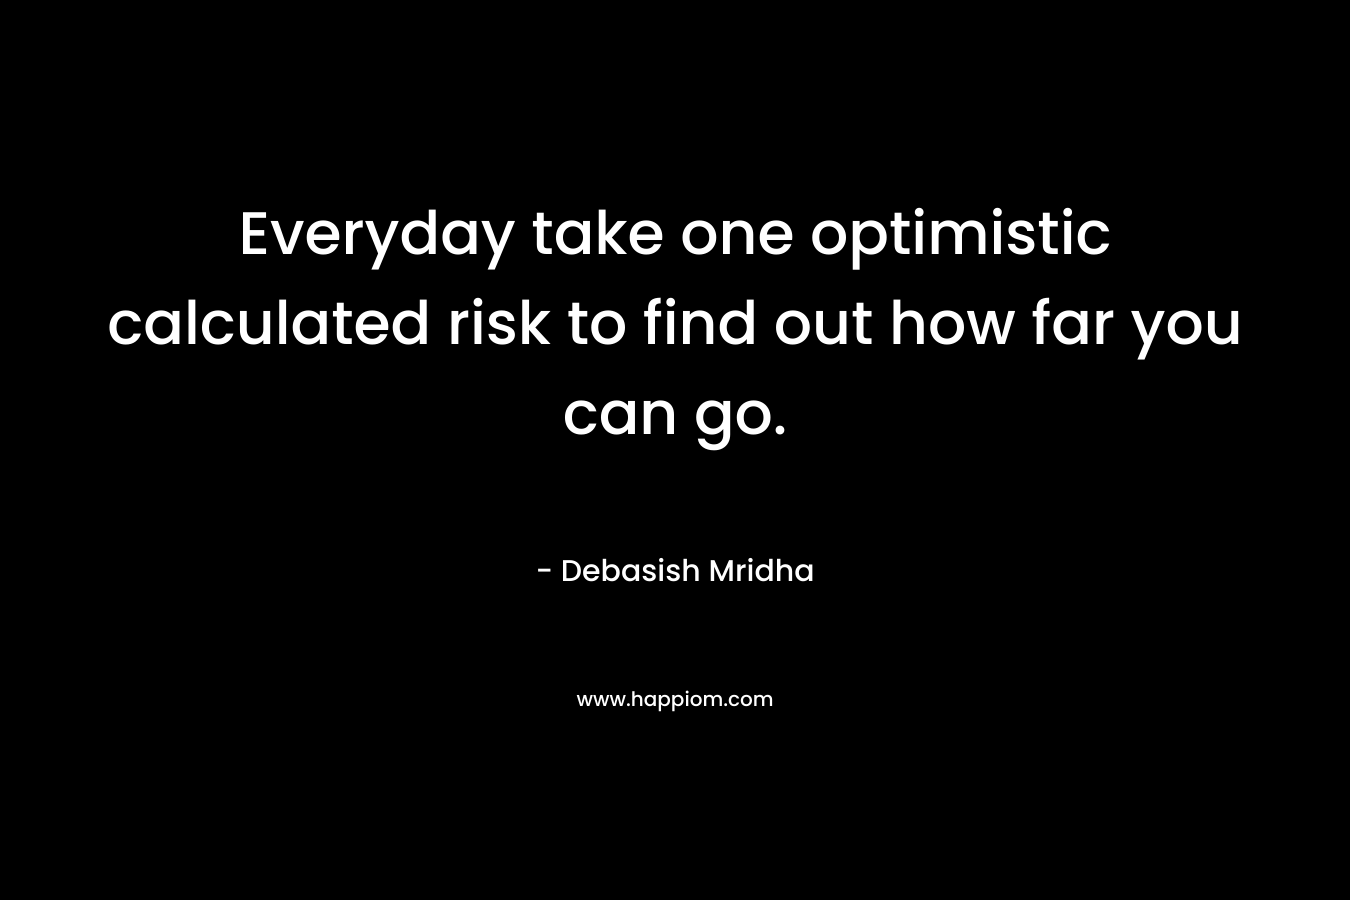 Everyday take one optimistic calculated risk to find out how far you can go.